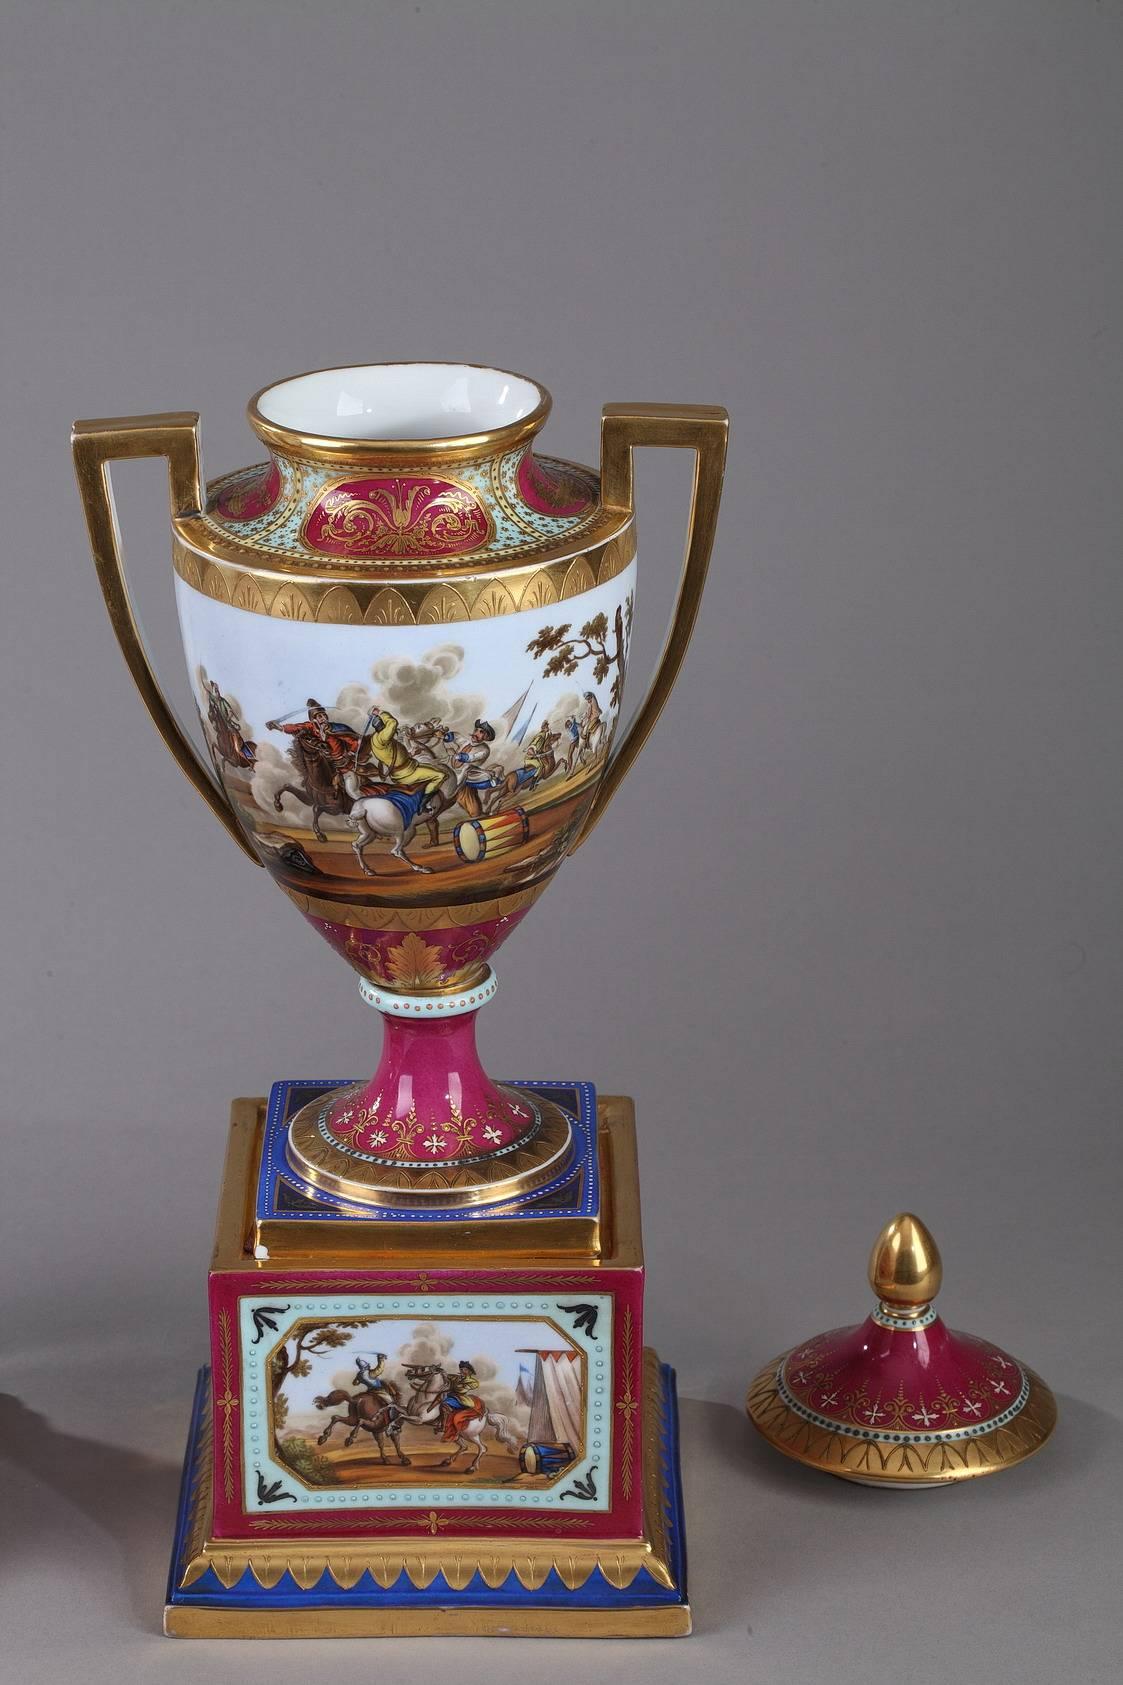 Pair of porcelain vases with removable lid. They are embellished with multicolored friezes depicting scenes of battle probably drawn from the history of Austria and its conflicts with the Ottoman Empire. The collar and base are decorated with gilded